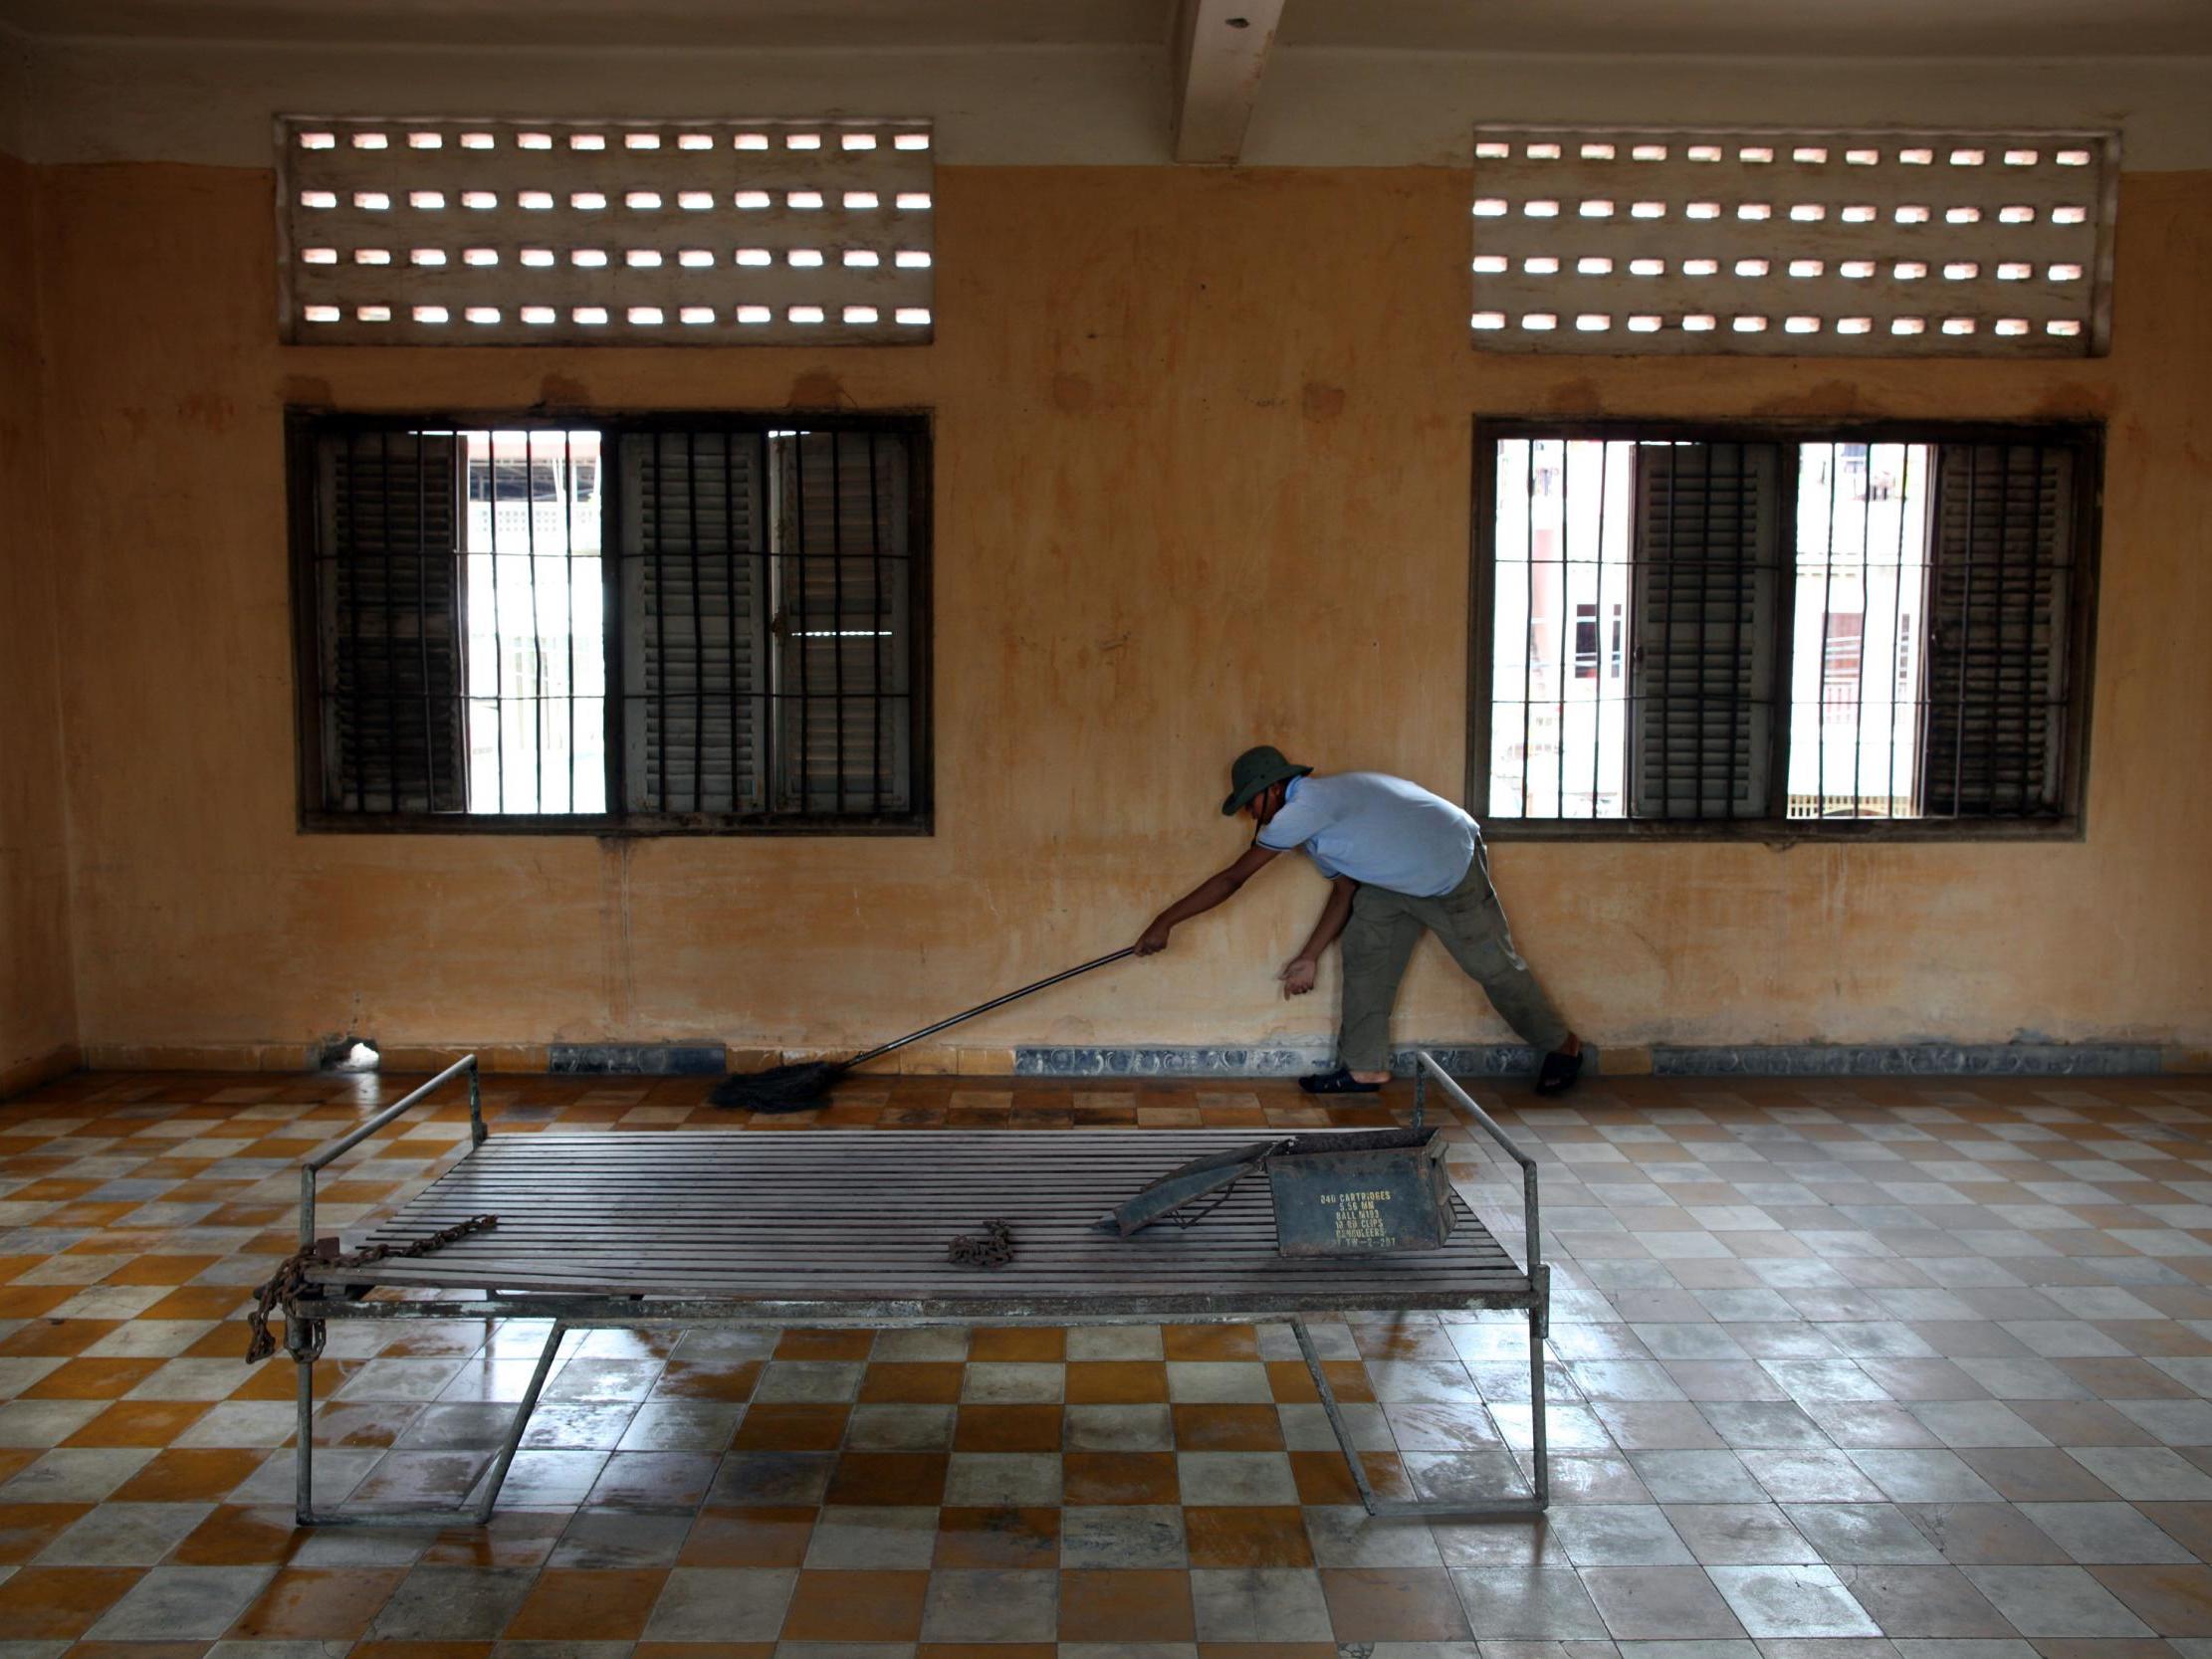 A worker cleans the floor inside the notorious S-21 prison known as Tuol Sleng, which has since been turned into a museum, where more than 15,000 people were executed during the Khmer Rouge regime